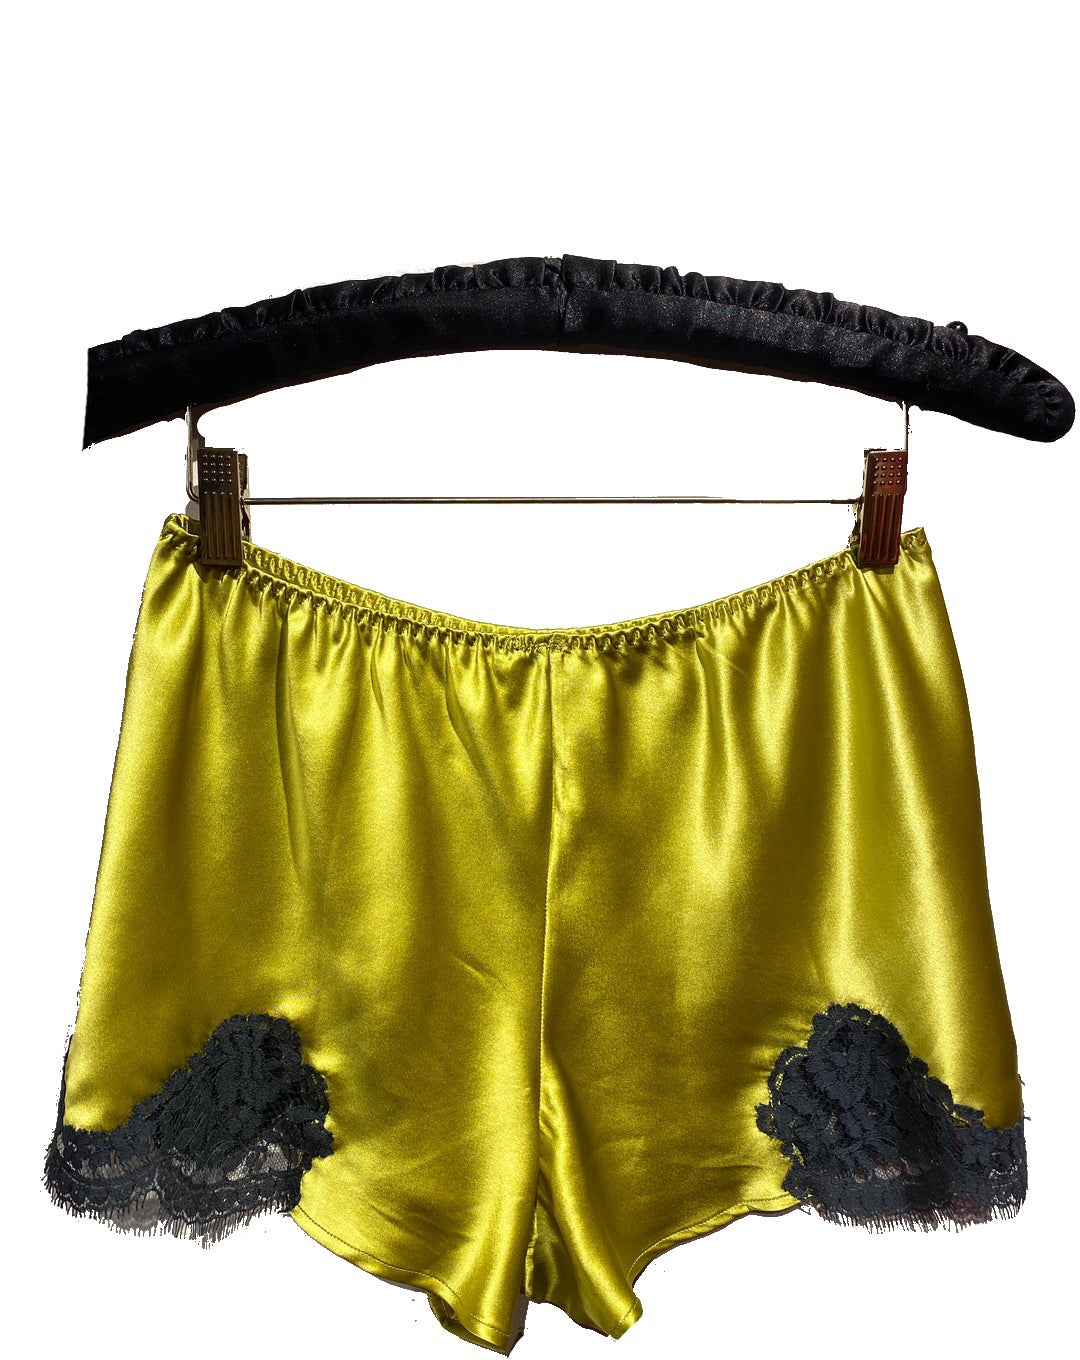 NEW! Chartruese Marjolaine Silk Blend French Knicker with Lace Applique